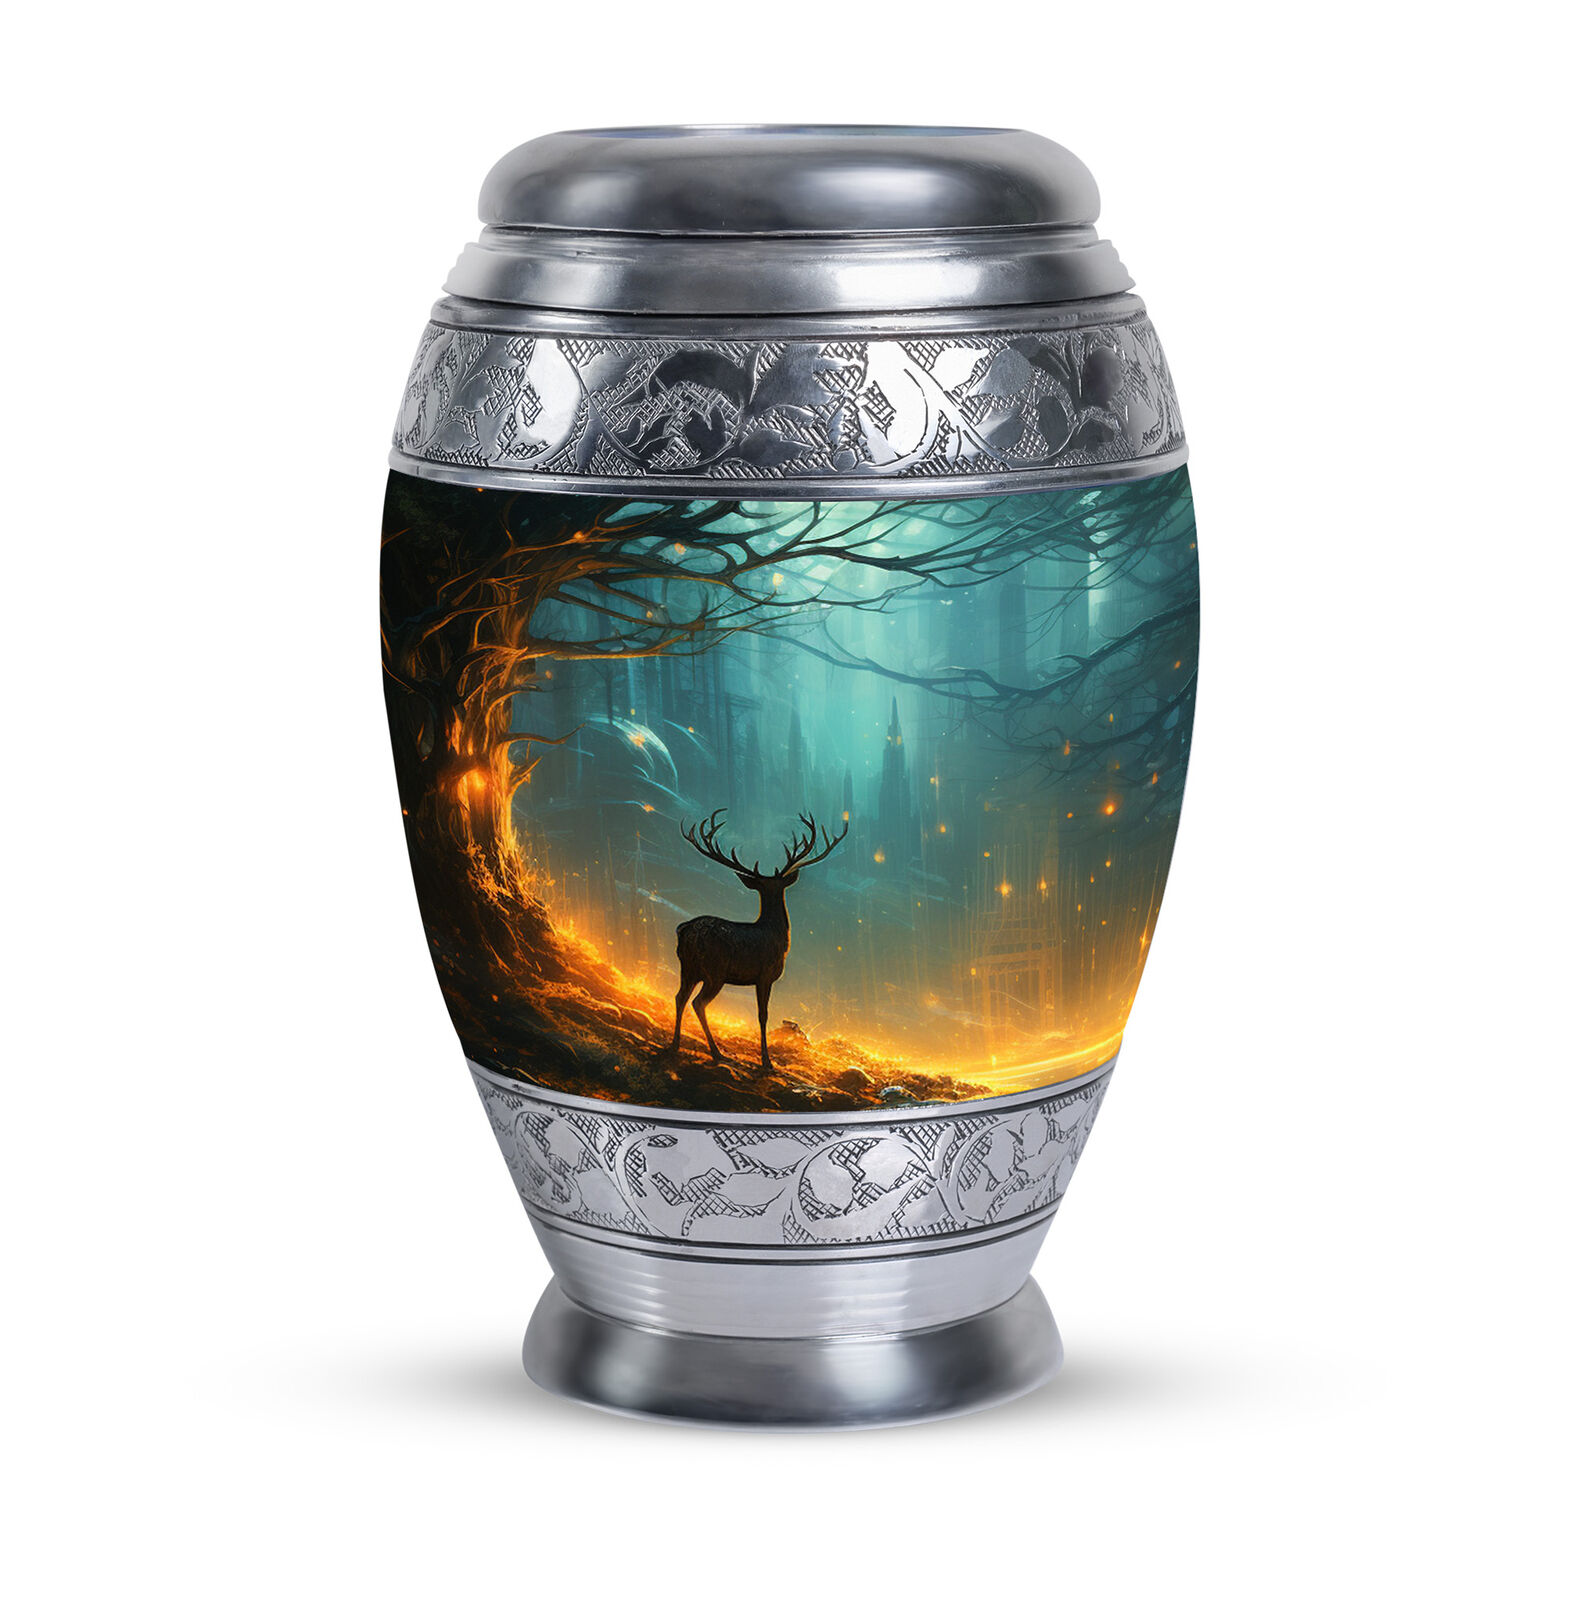 Large Urns Mystical Dear Standing In A Deep Forest With Glow (10 Inch) Large Urn